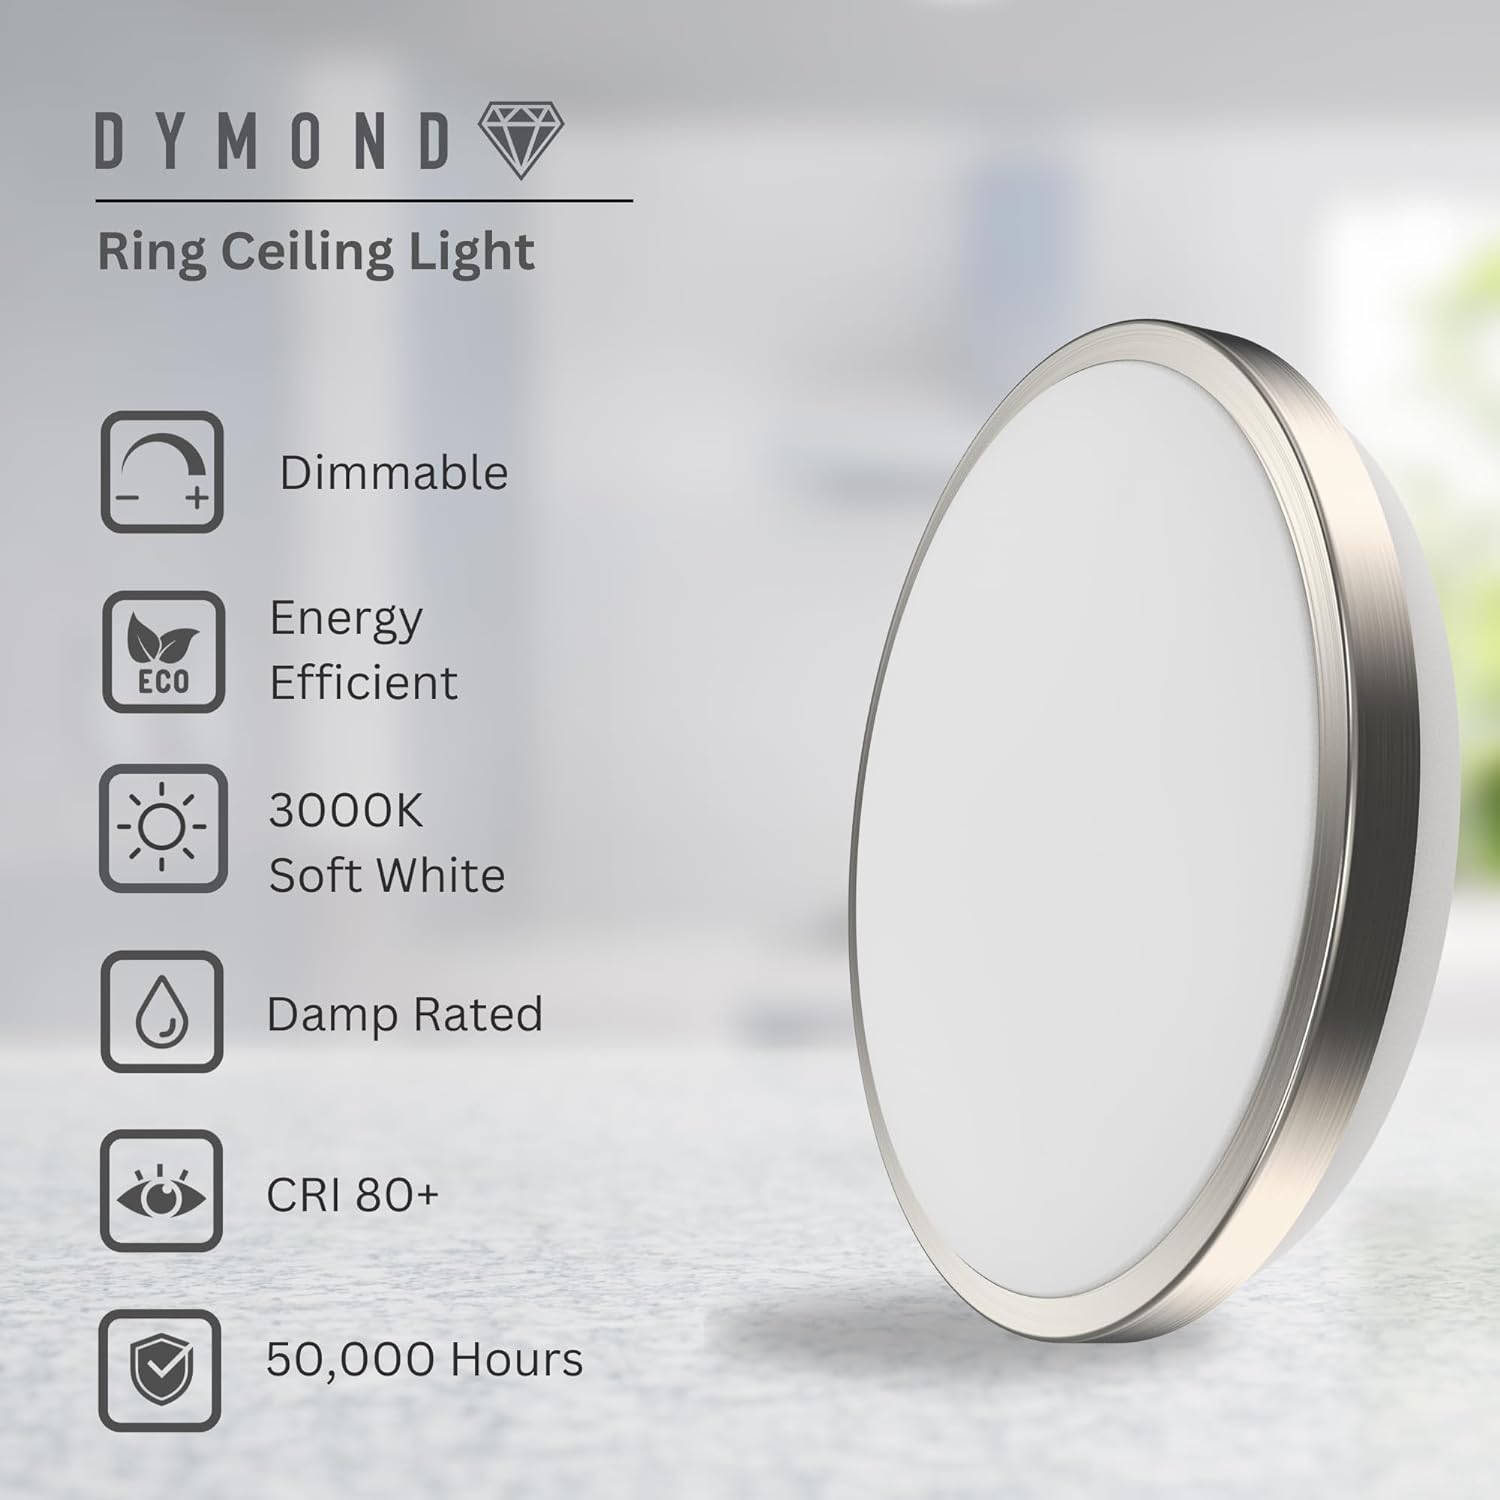 DYMOND 10 Inch LED Ceiling Light Flush Mount Brushed Nickel Dimmable Ring 3000K Warm White for Bedroom, Kitchen, Bathroom, Hallway, Stairwell